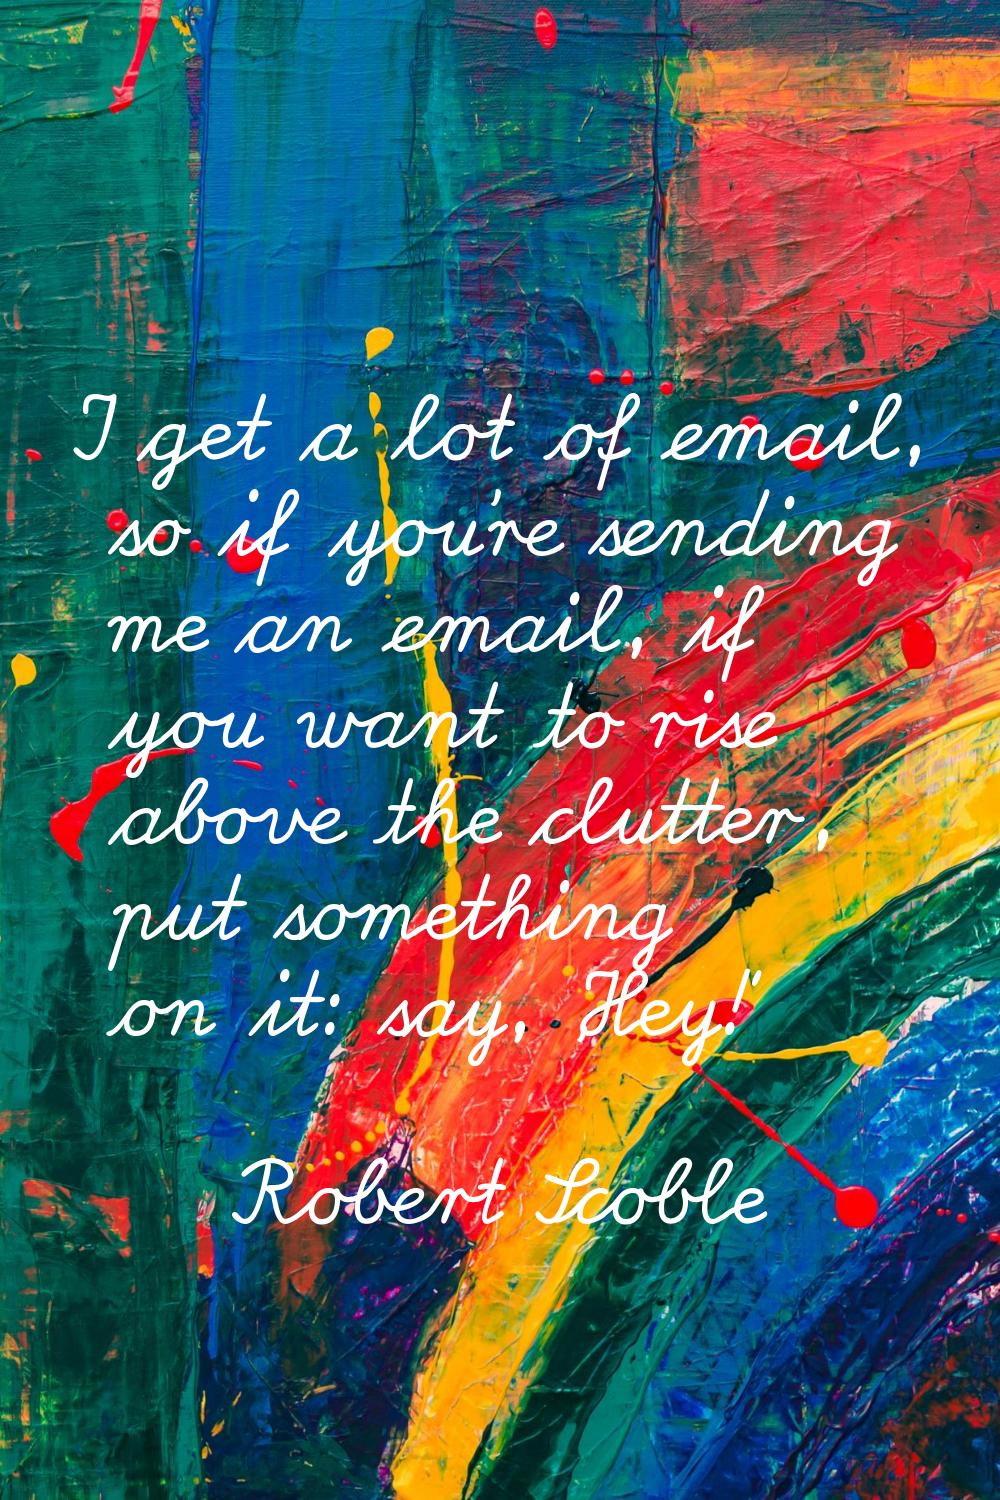 I get a lot of email, so if you're sending me an email, if you want to rise above the clutter, put 